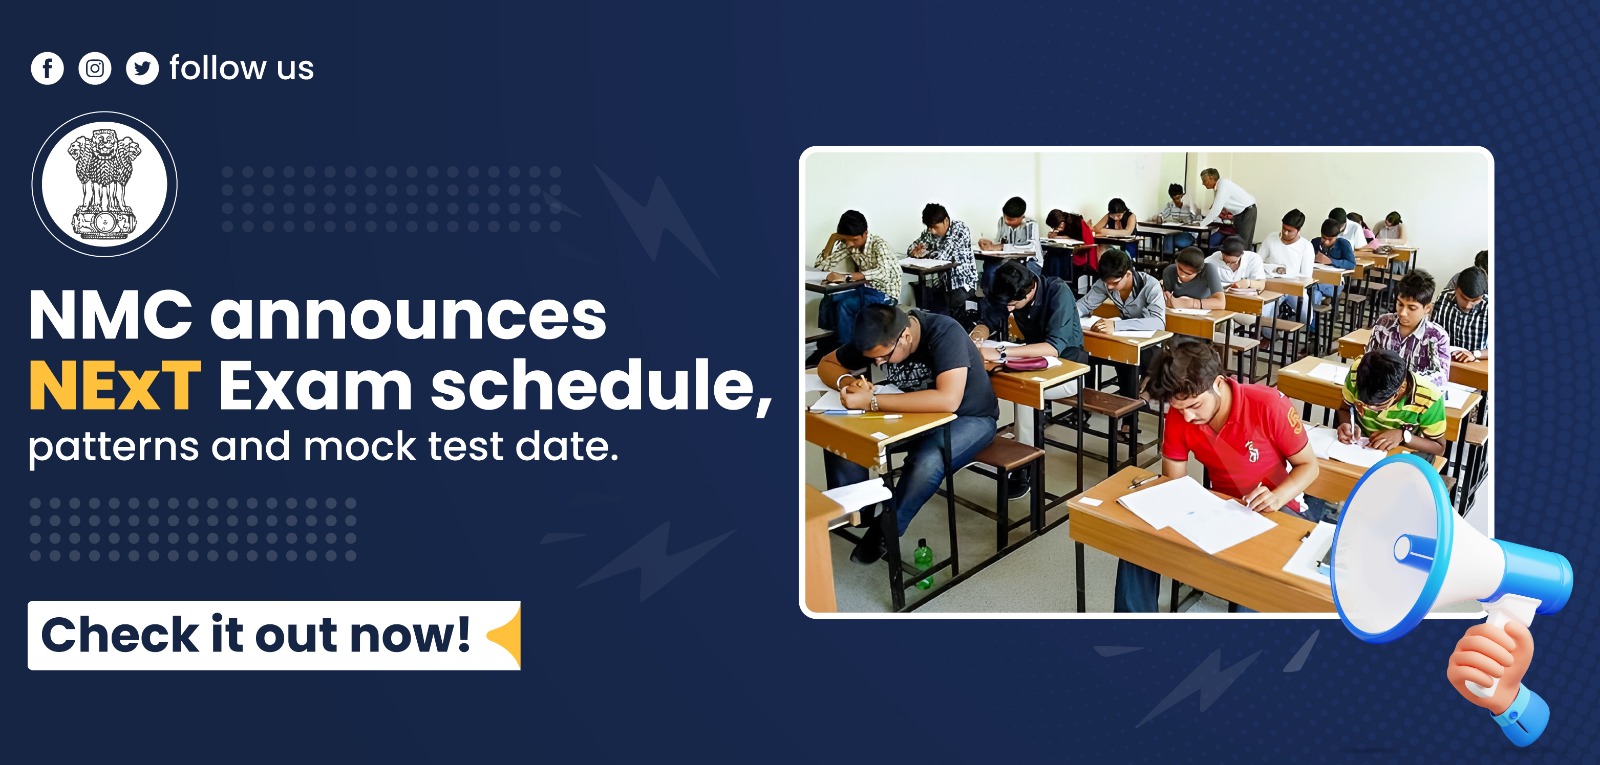 NMC announces NExT Exam schedule, patterns and mock test date.